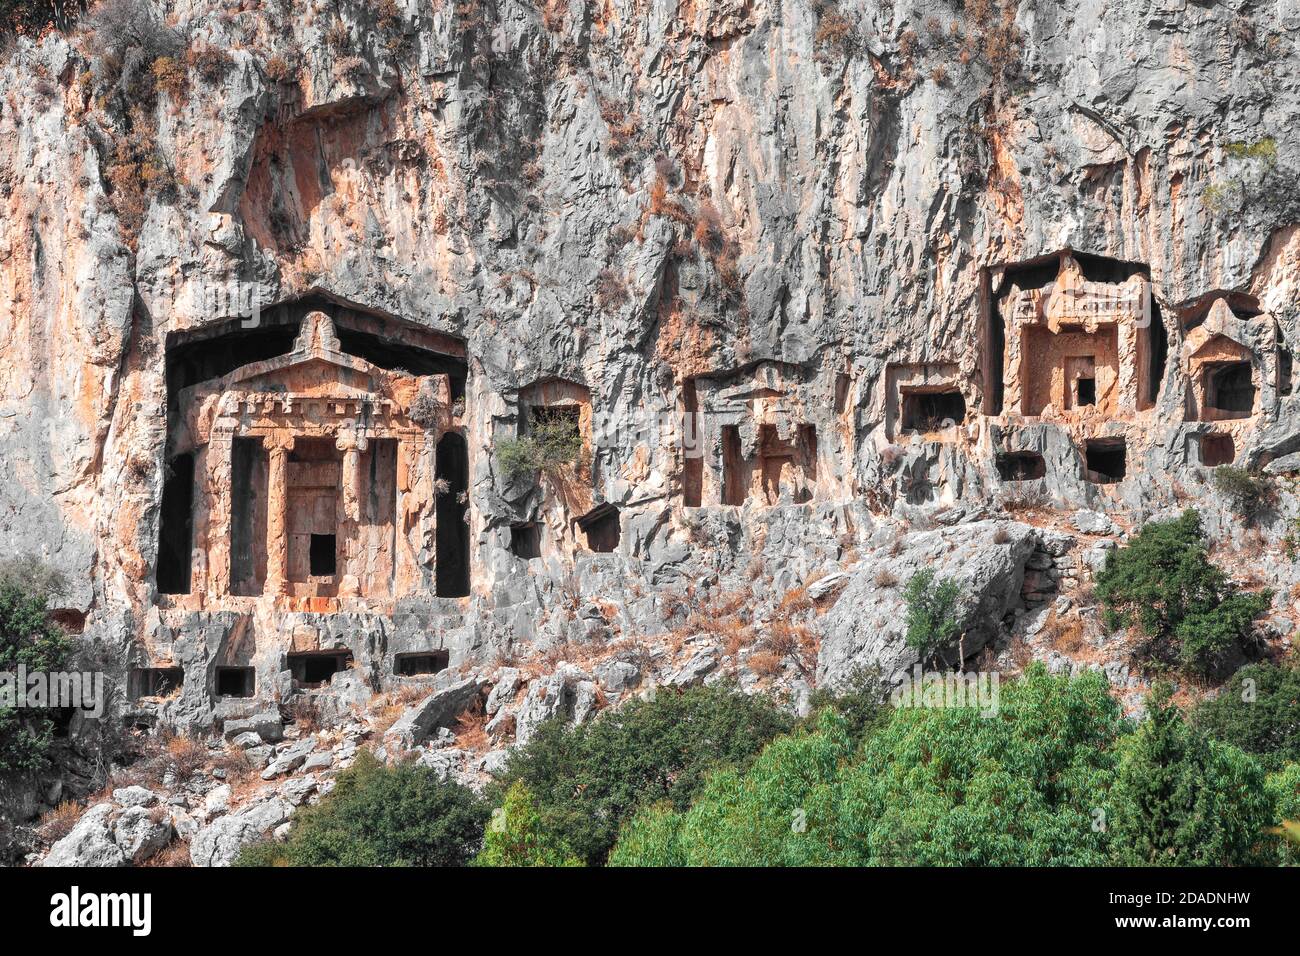 wonder from ancient civilizations : Lycian Rock Tombs of Kaunos near Dalyan, Southern Turkey. Turkish Lycian tombs - ancient necropolis in the mountai Stock Photo